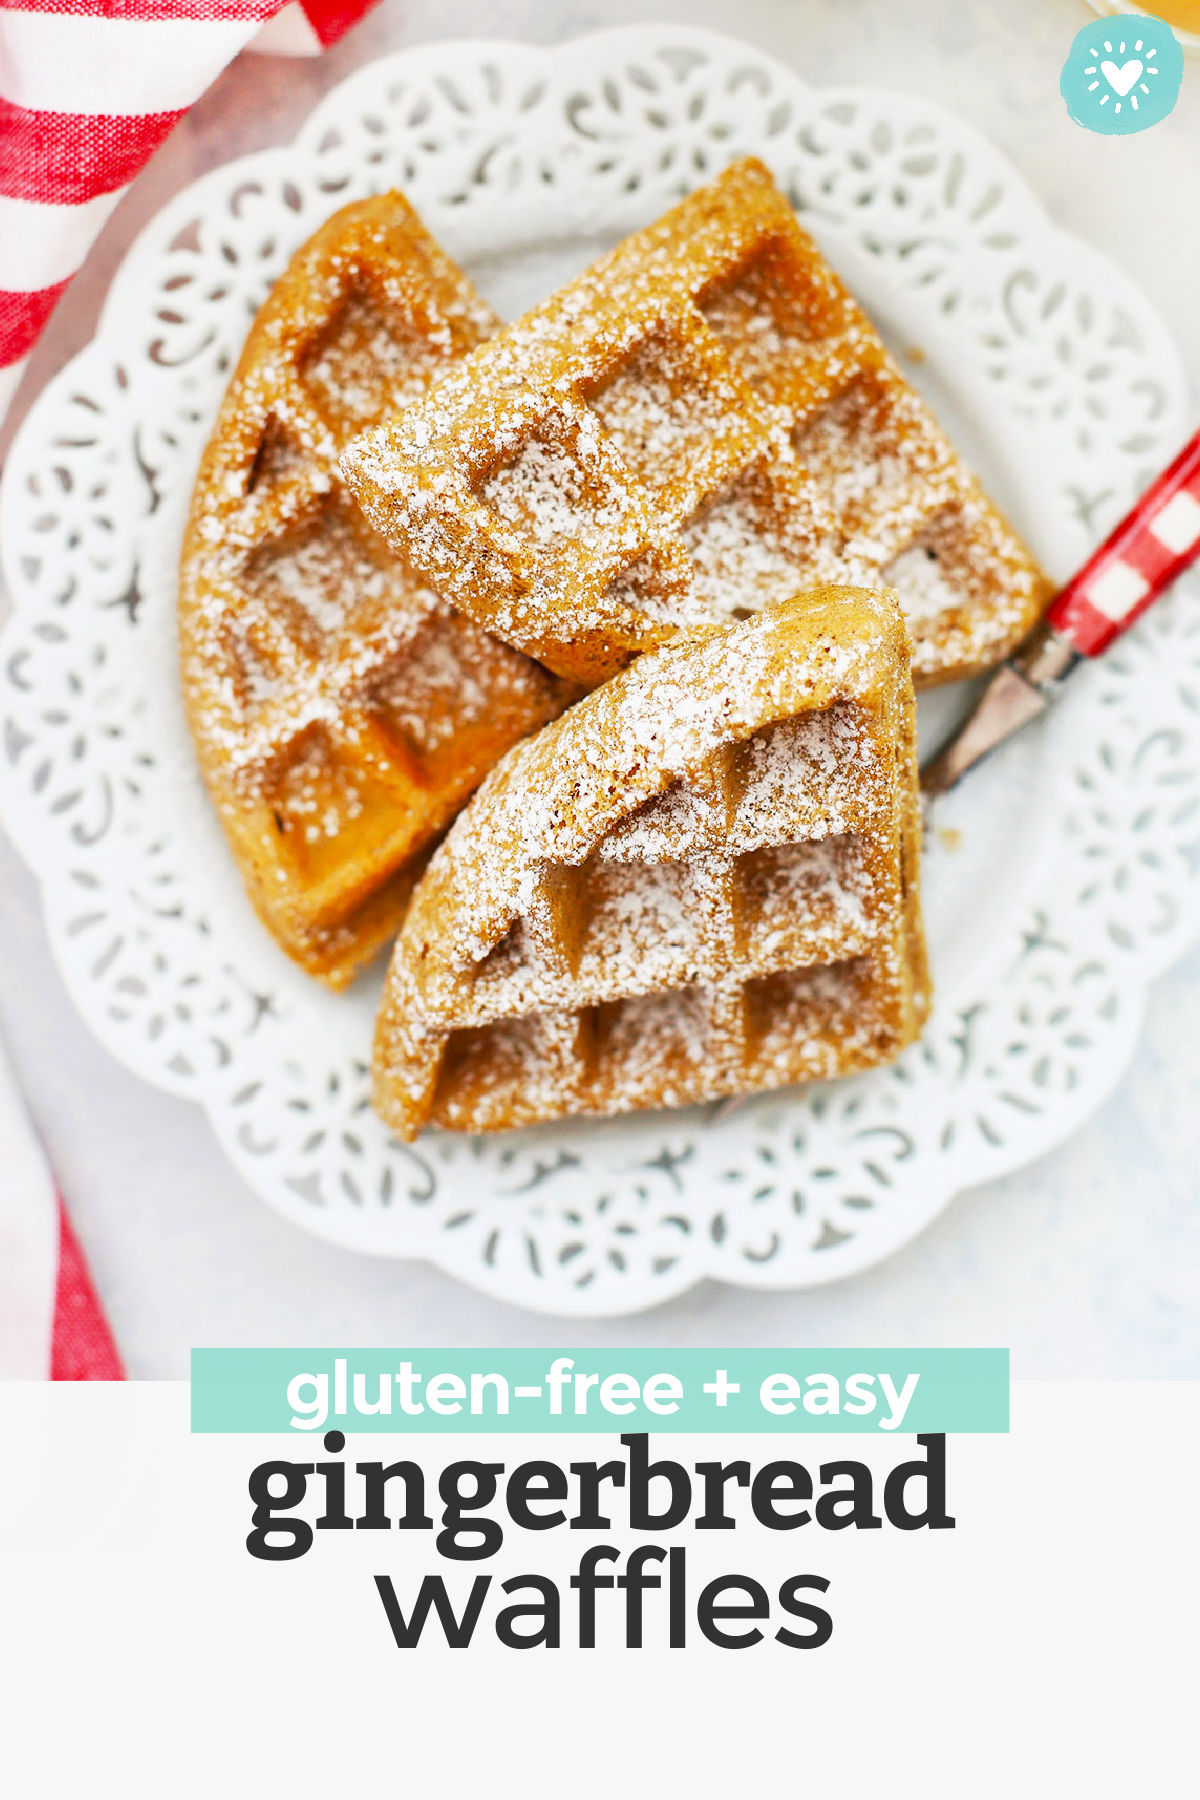 Gluten Free Gingerbread Waffles - crispy exterior, fluffy interior, and perfectly spiced. The perfect holiday breakfast! (Gluten free, dairy free)// gluten free Holiday breakfast // gluten free Christmas breakfast // gluten free waffles recipe // gluten free brunch / gluten free christmas brunch / gluten free holiday brunch